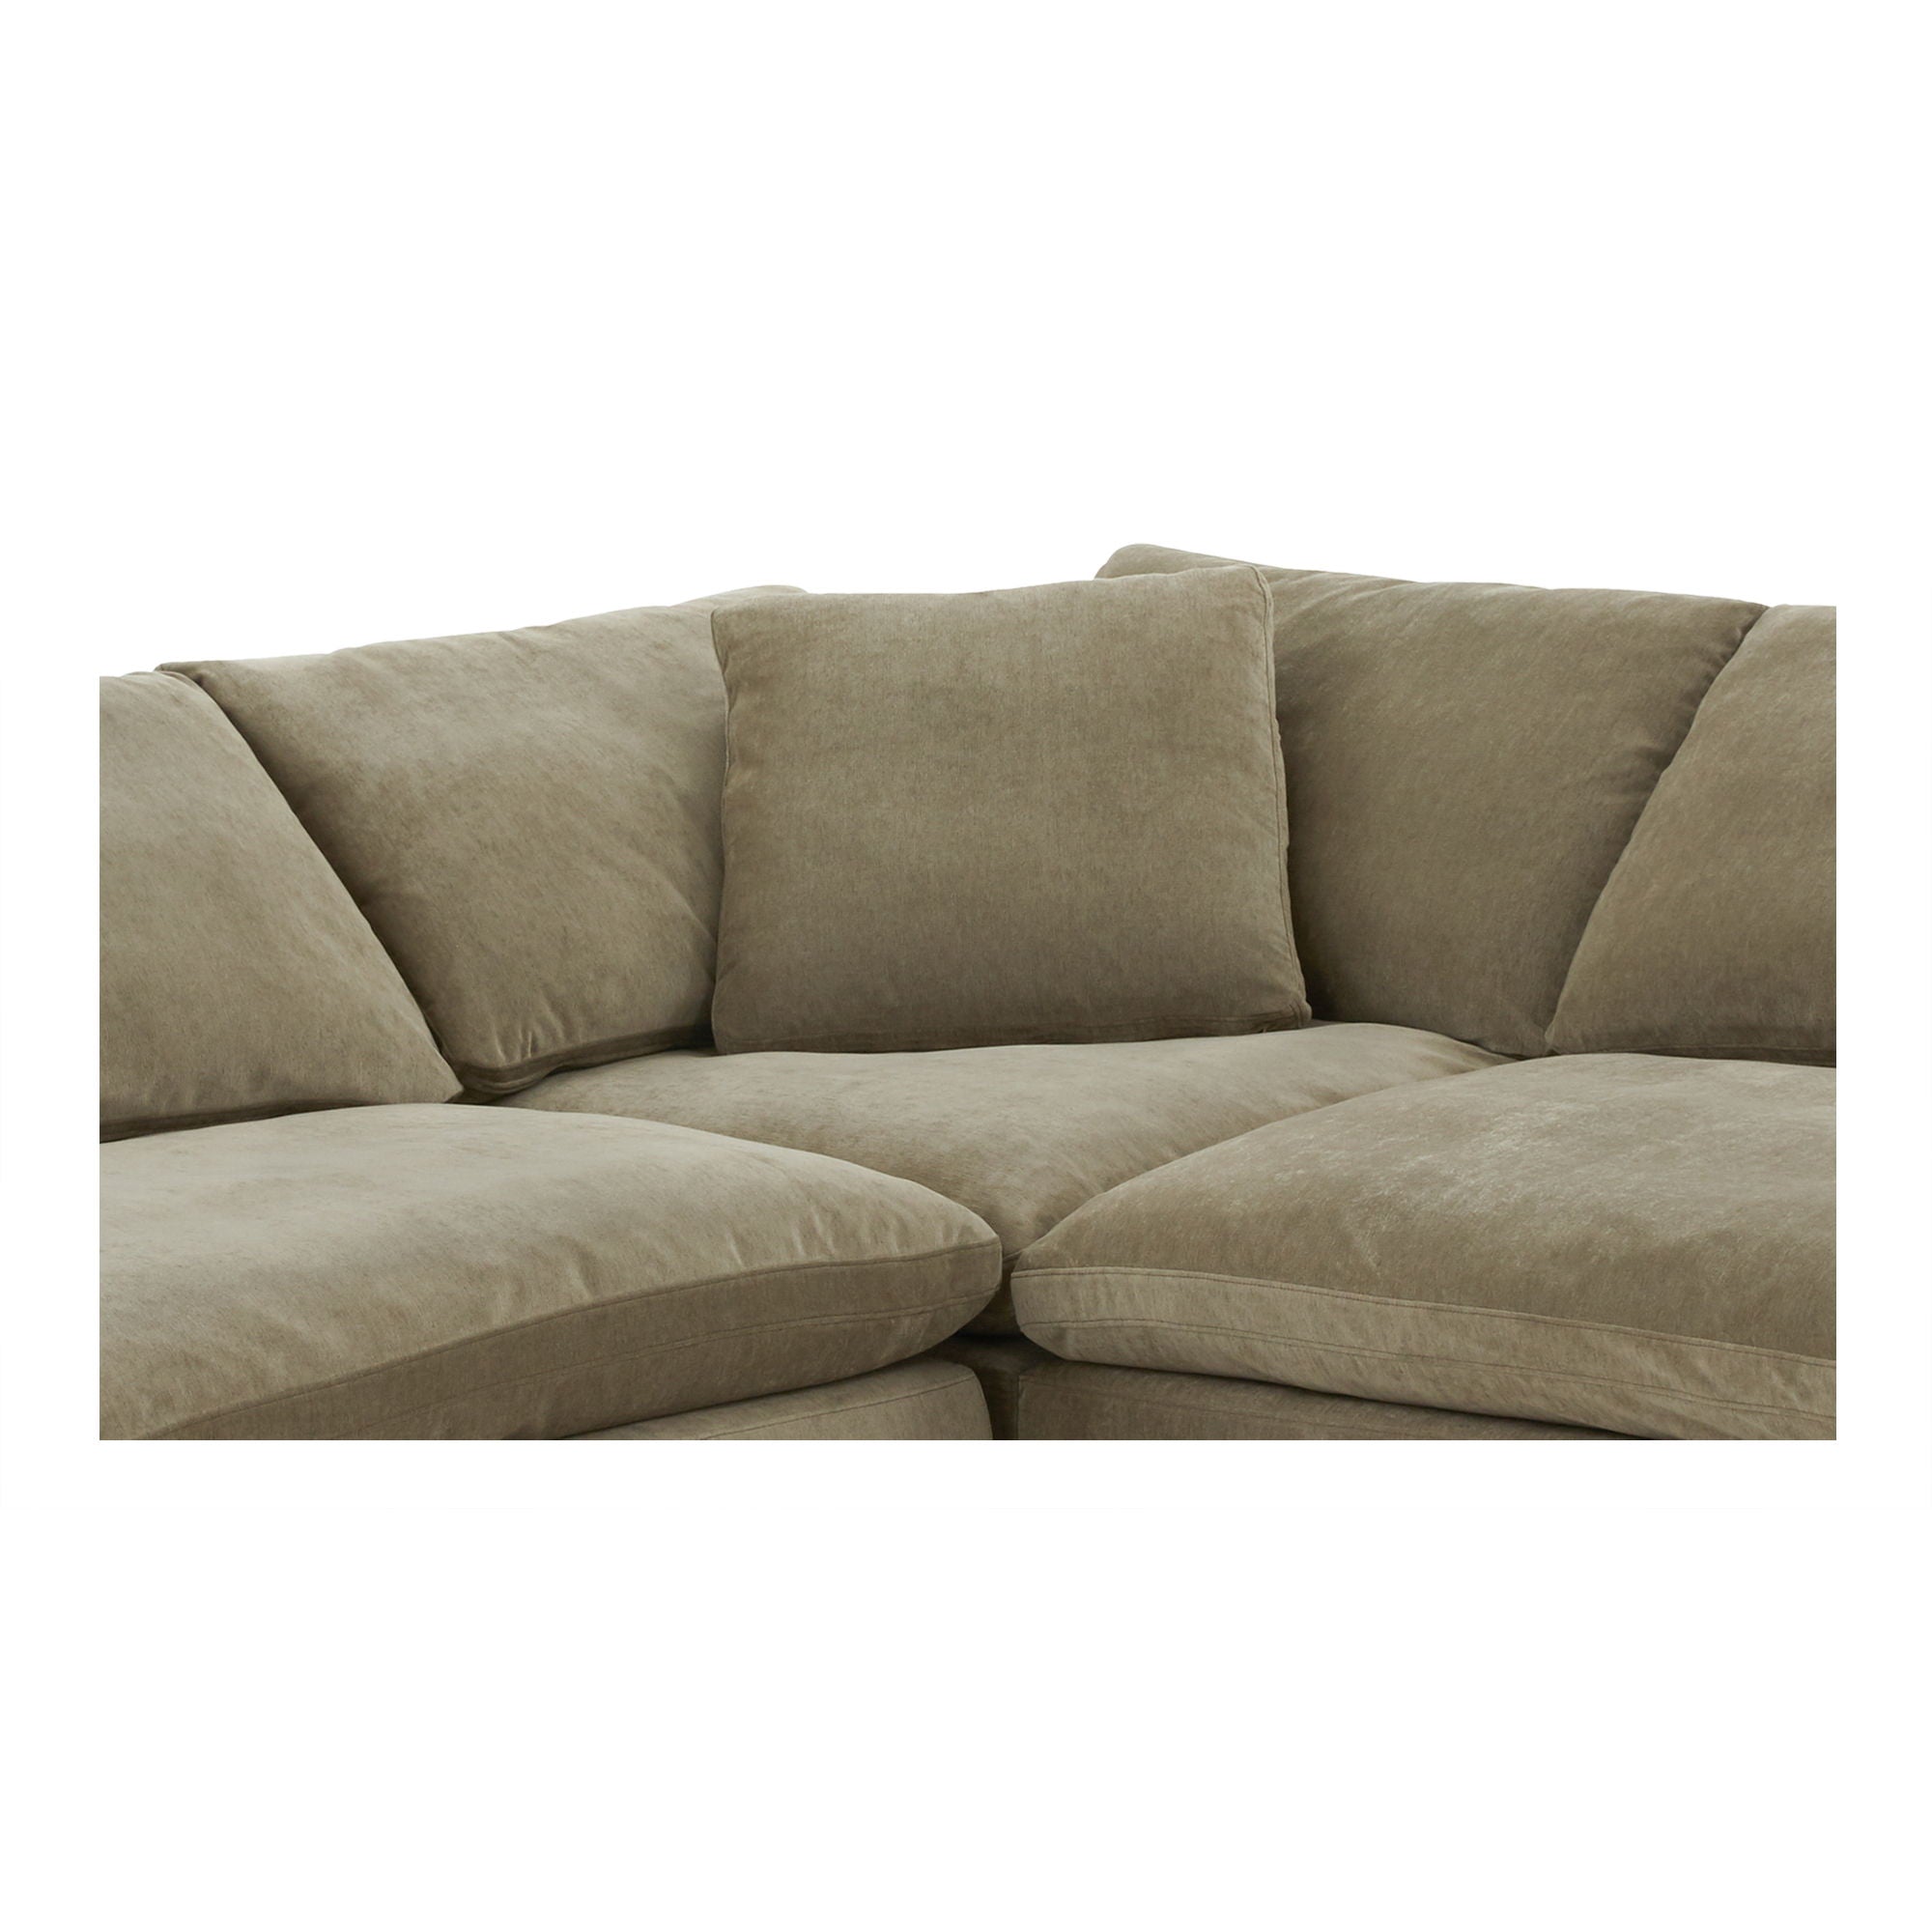 Terra Classic Desert Sage Performance Modular Sectional - Scandinavian Style-Stationary Sectionals-American Furniture Outlet